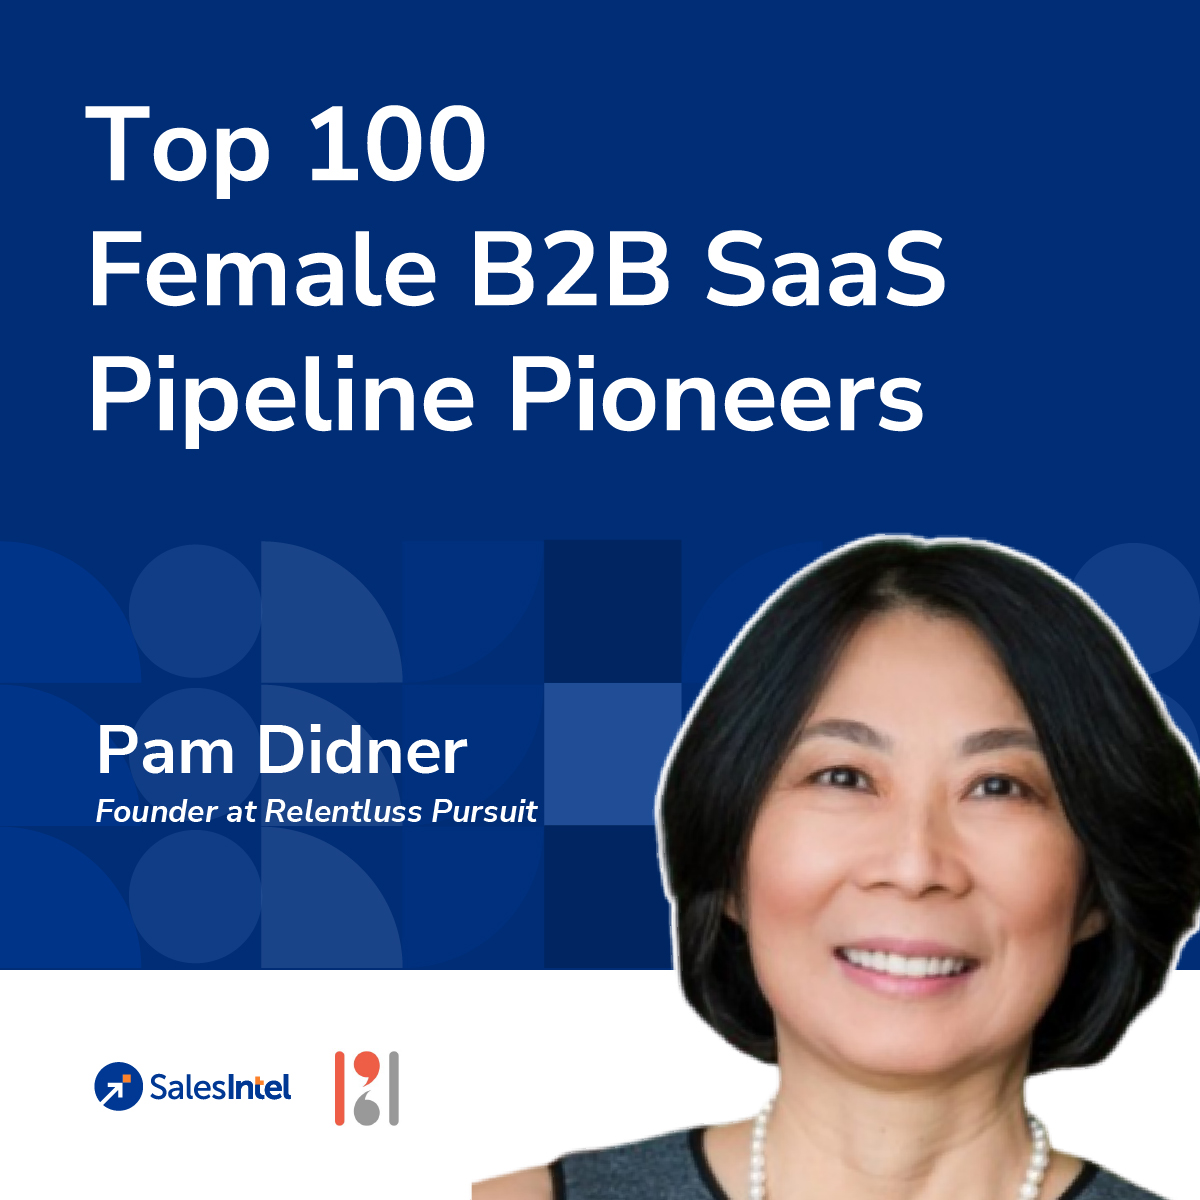 Women in B2B SaaS are nothing short of amazing! I love that @sales_ntel created the 'Top 100 Female B2B SaaS Pipeline Pioneers of 2024' list to recognize badass women. Thx so much for including me. loom.ly/YuFUf_4 #WomenInbBusiness #leadership #innovation